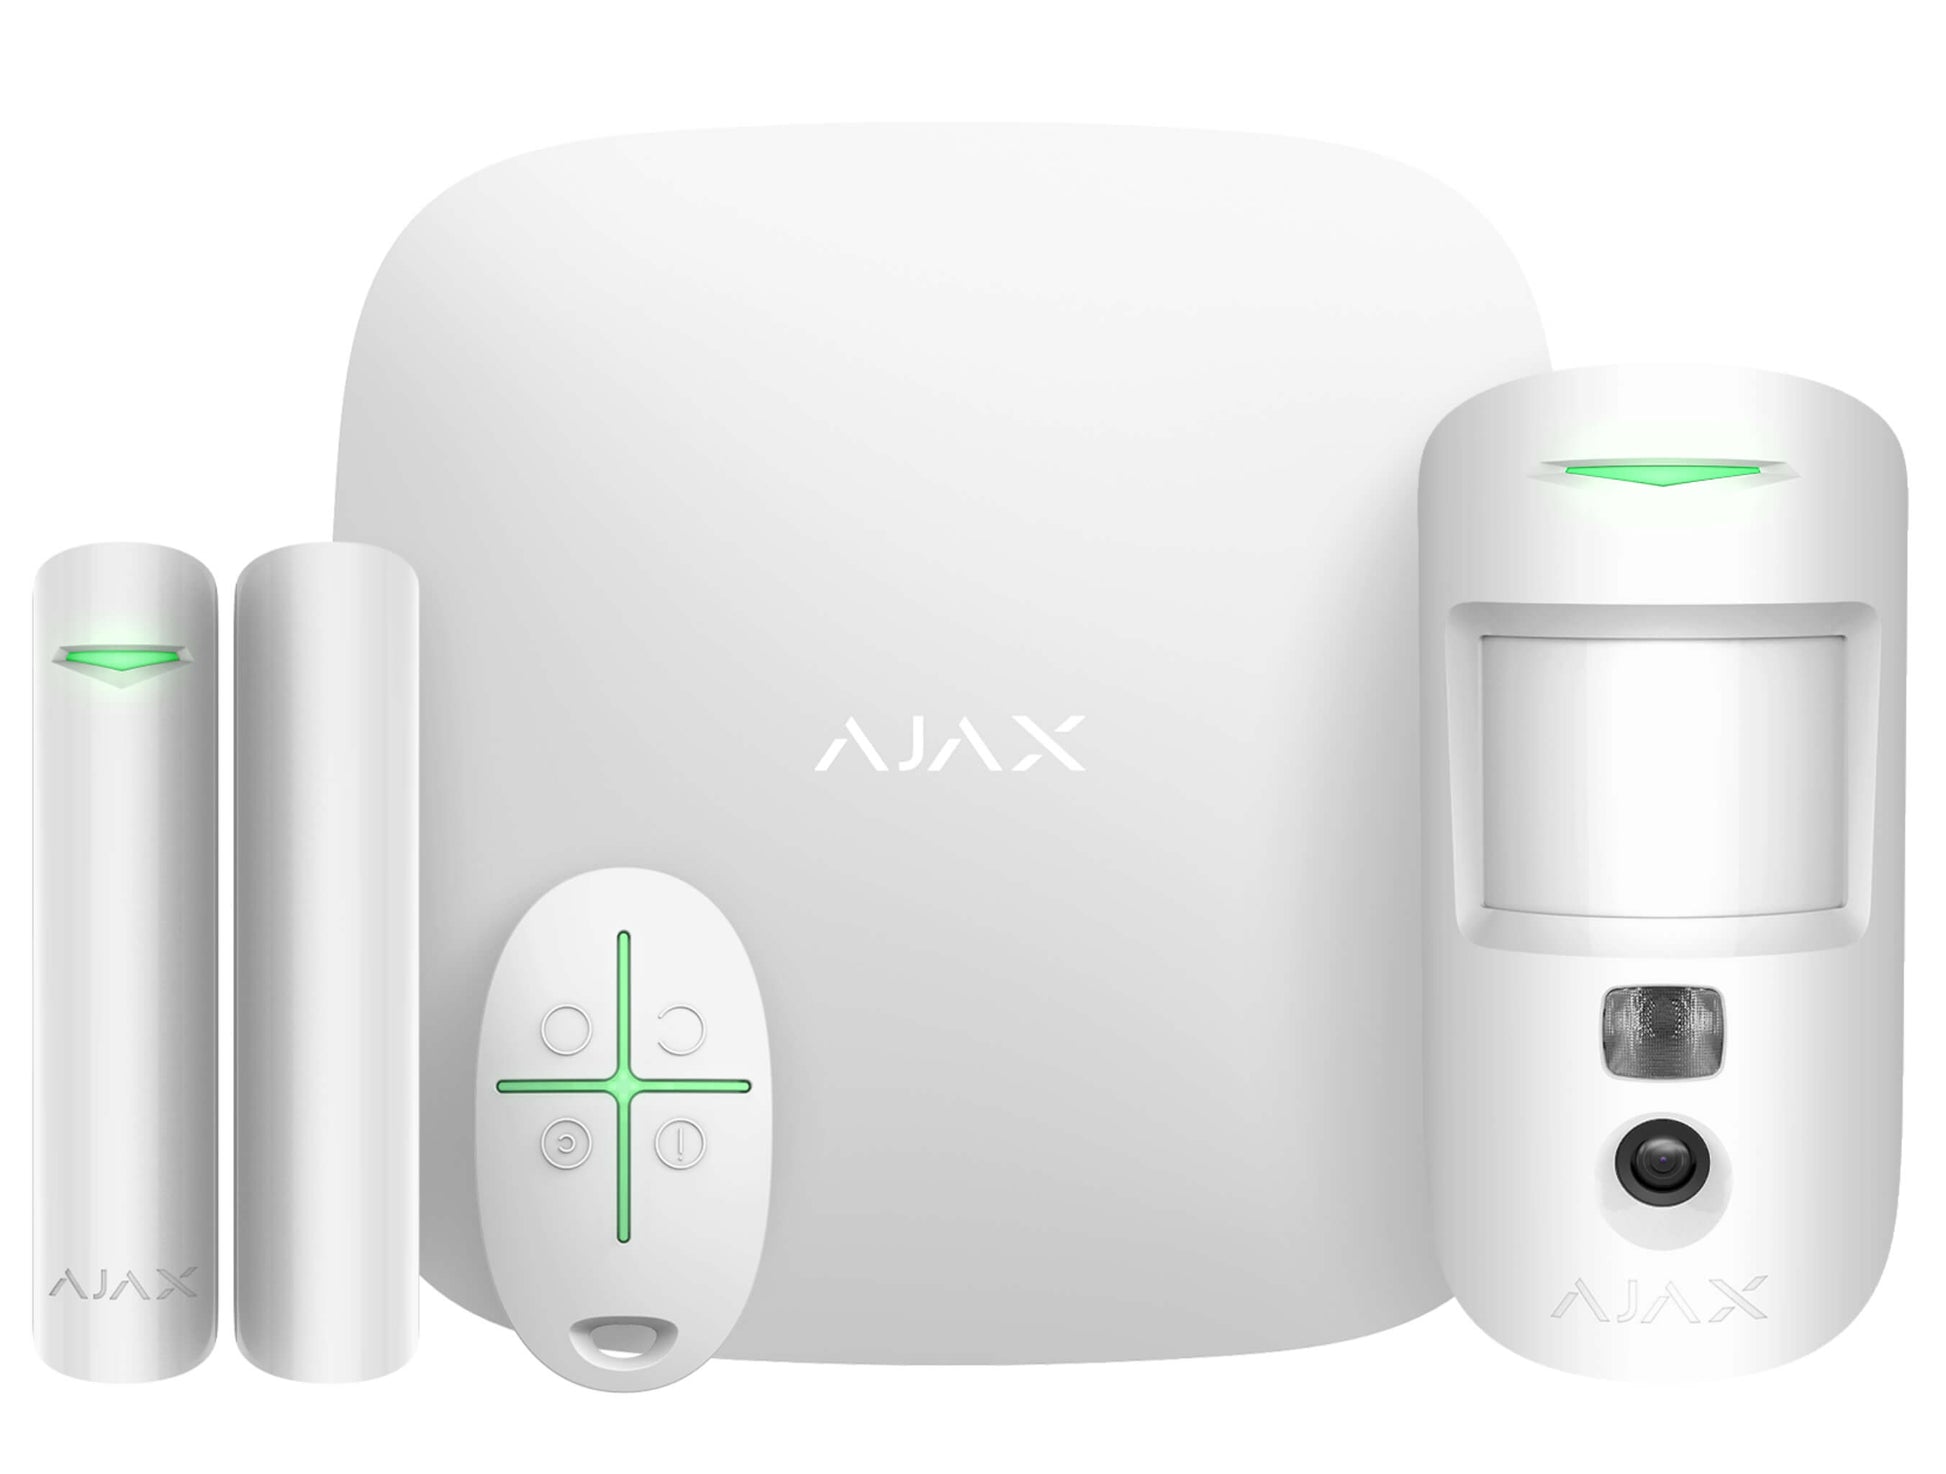 White Ajax StarterKit - a fully wireless system from Ajax security systems includes a Ajax Hub 2 plus, Ajax MotionCam, Ajax DoorProtect, Ajax SpaceControl all you need from small home or business solutions, Comes boxed up for convenience 